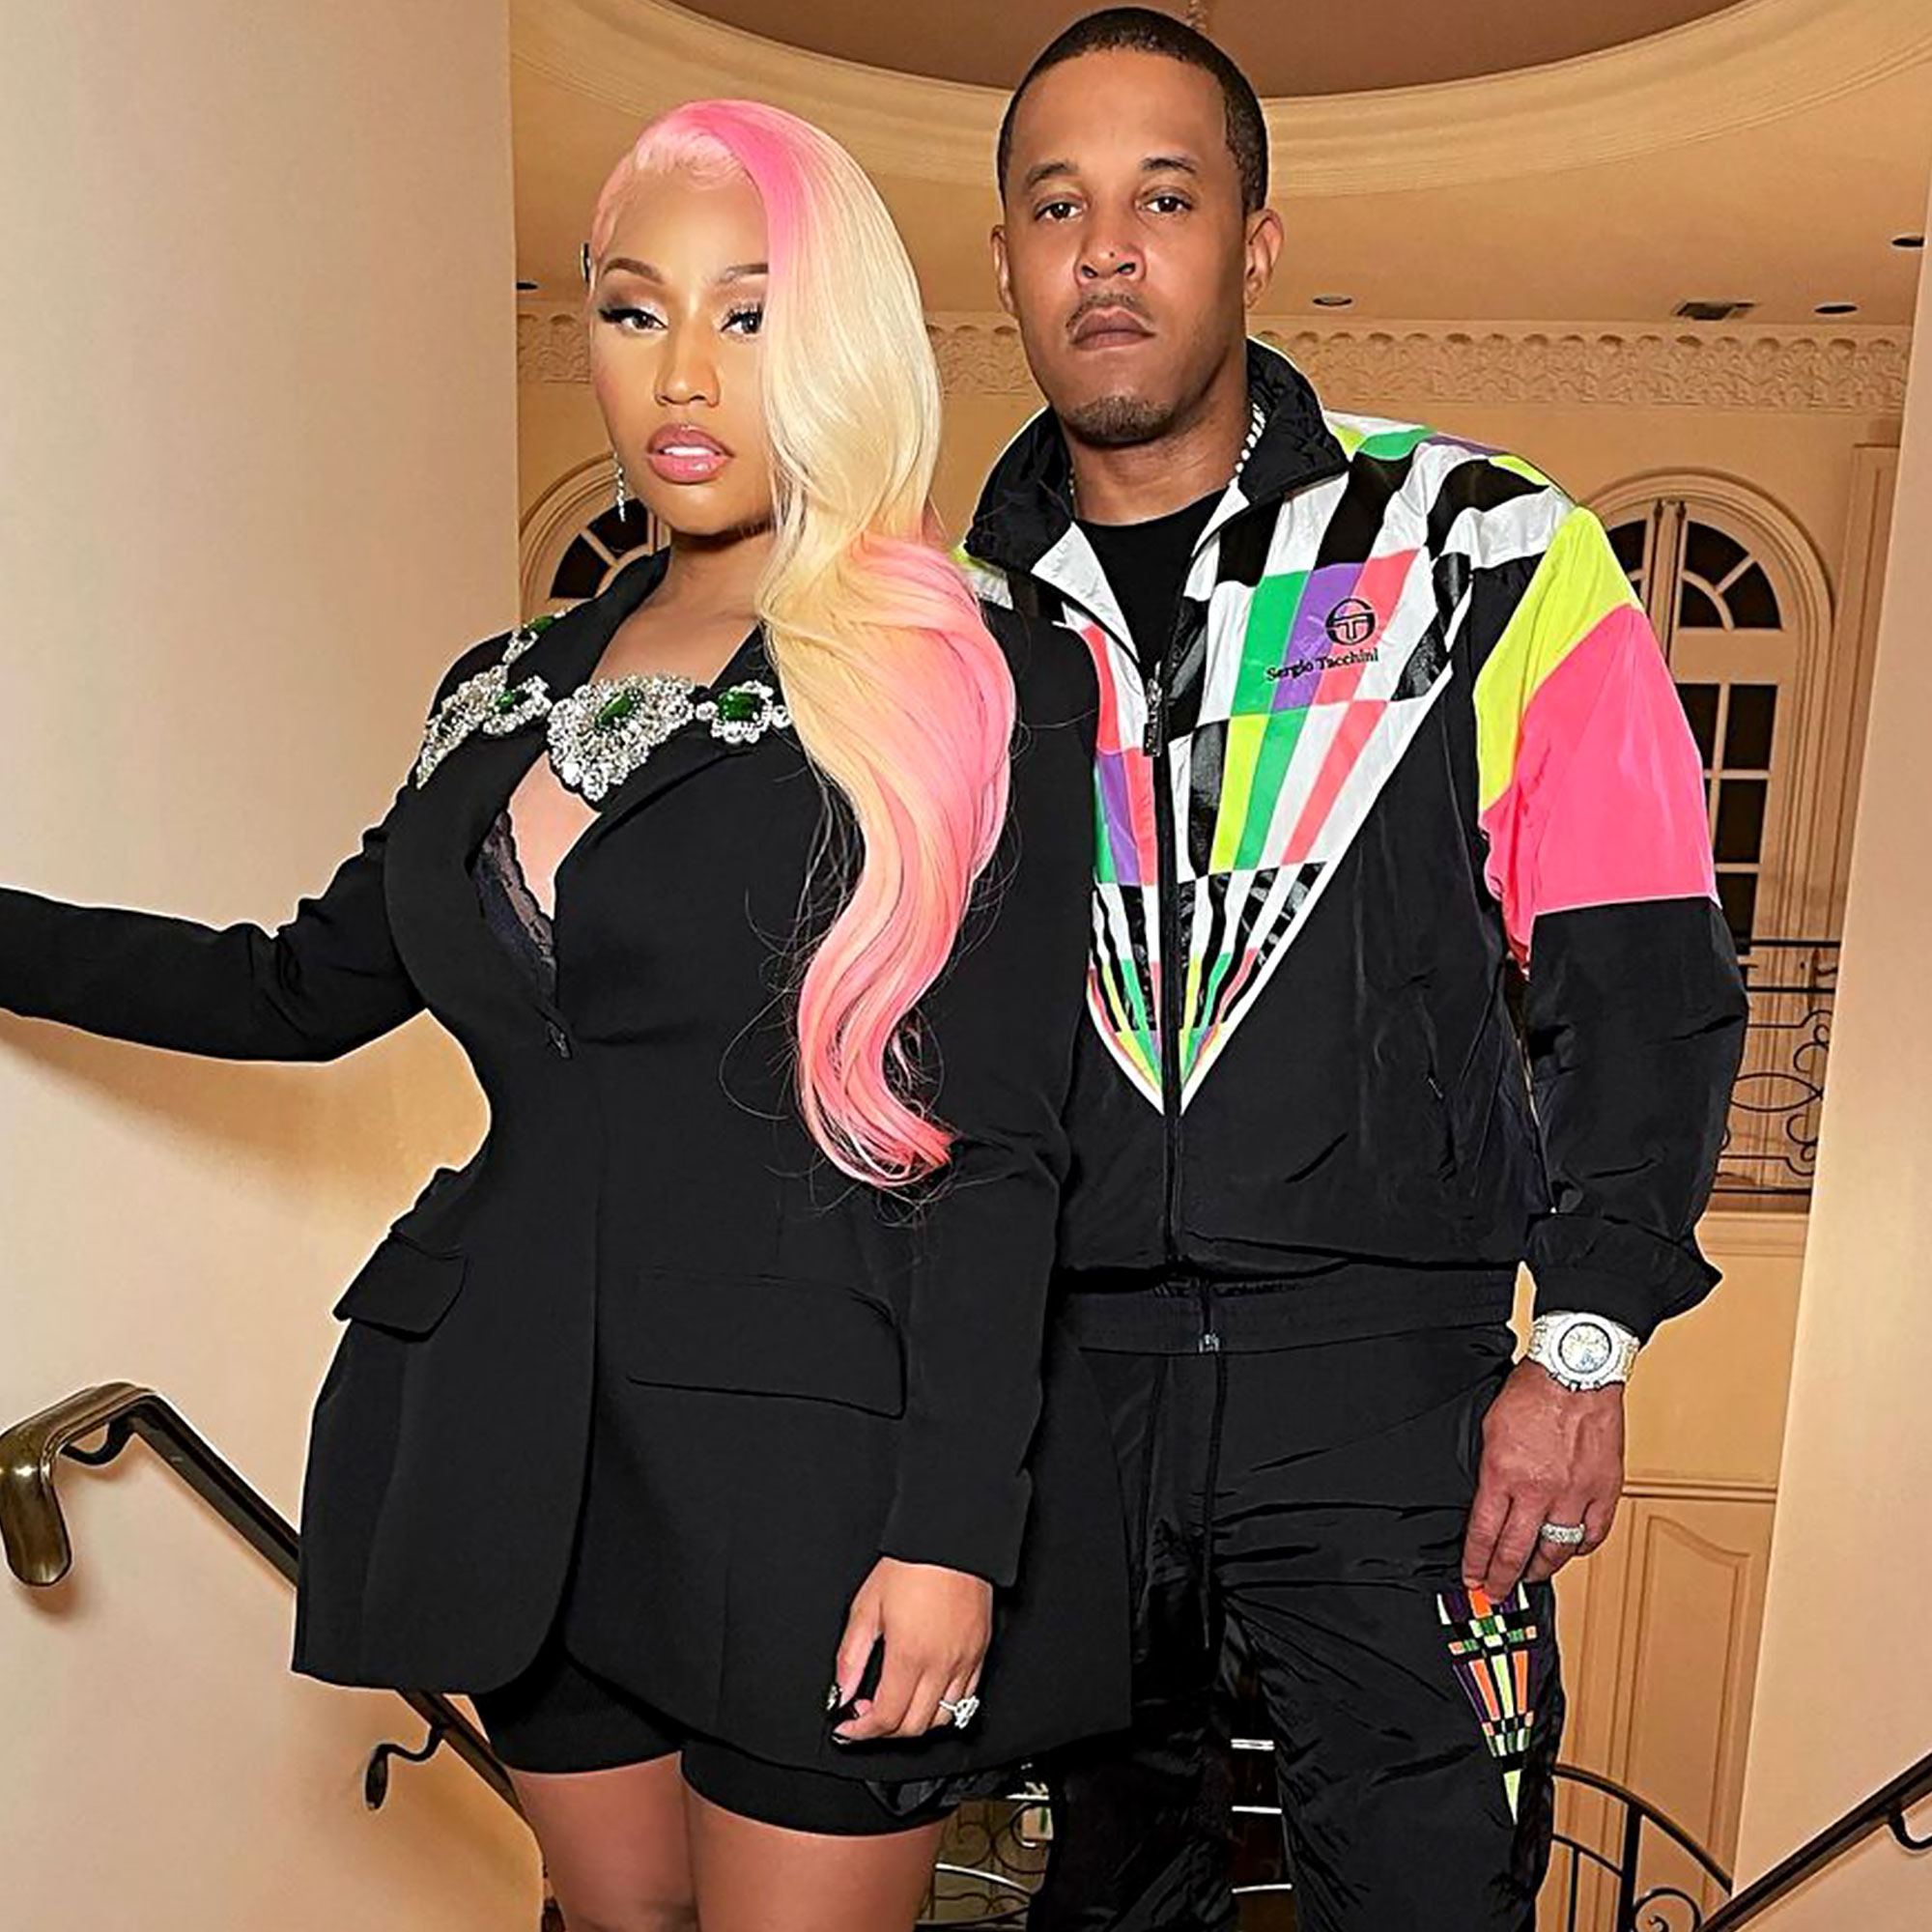 Nicki Minajs Husband Kenneth Petty Could Face 10 Years in Prison pic